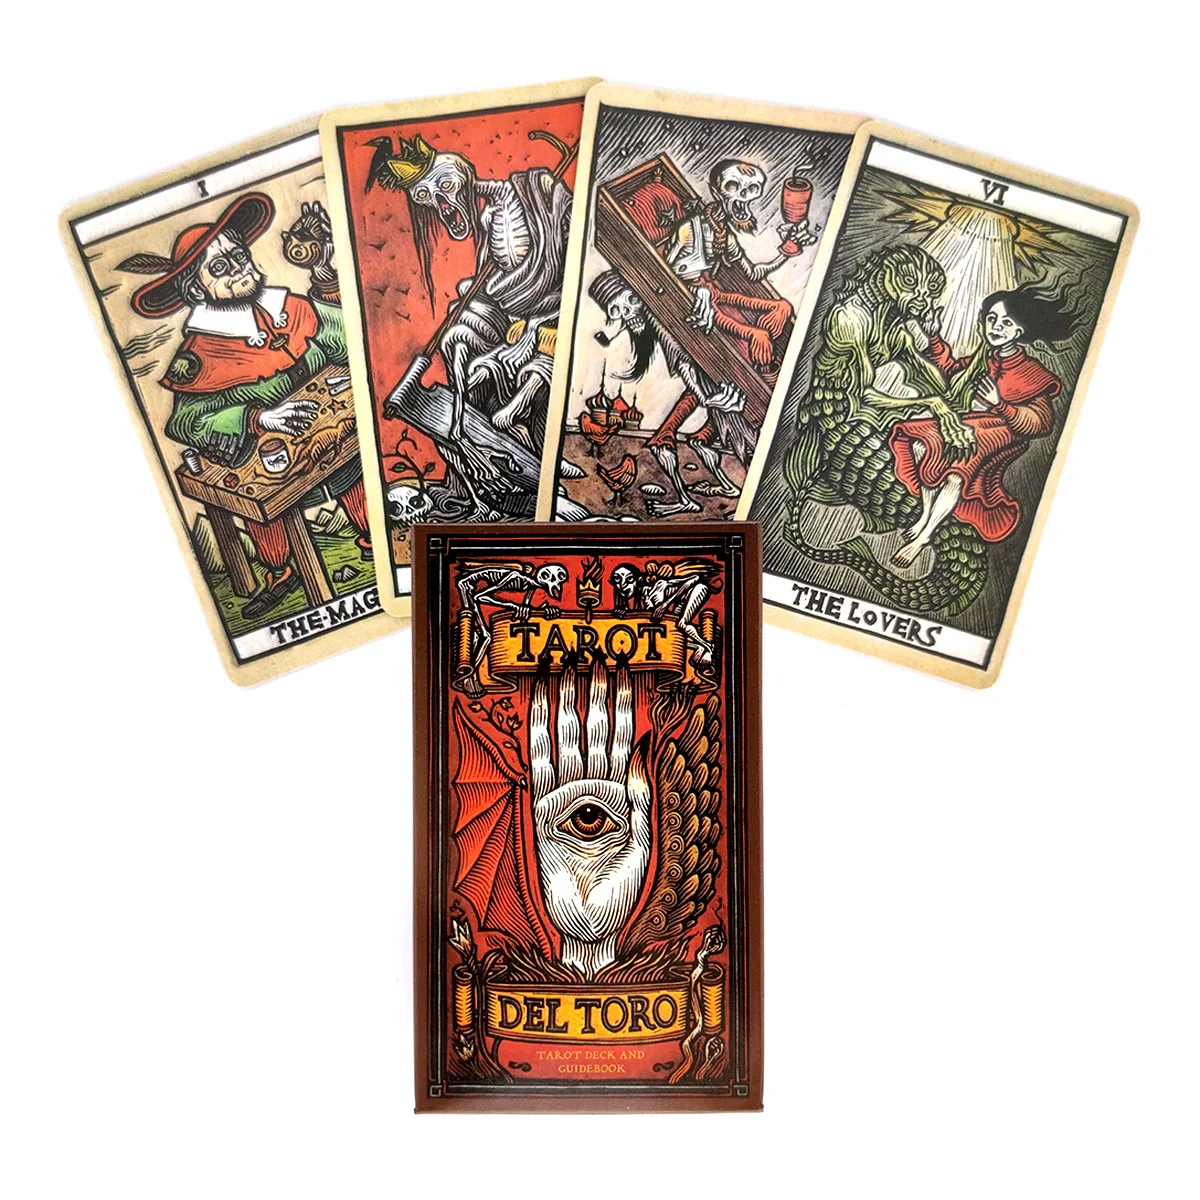 

2021 New Del Toro Tarot Cards And PDF Guidance Divination Deck Entertainment Parties Board Game Support Drop Shipping 78 Pcs/Box